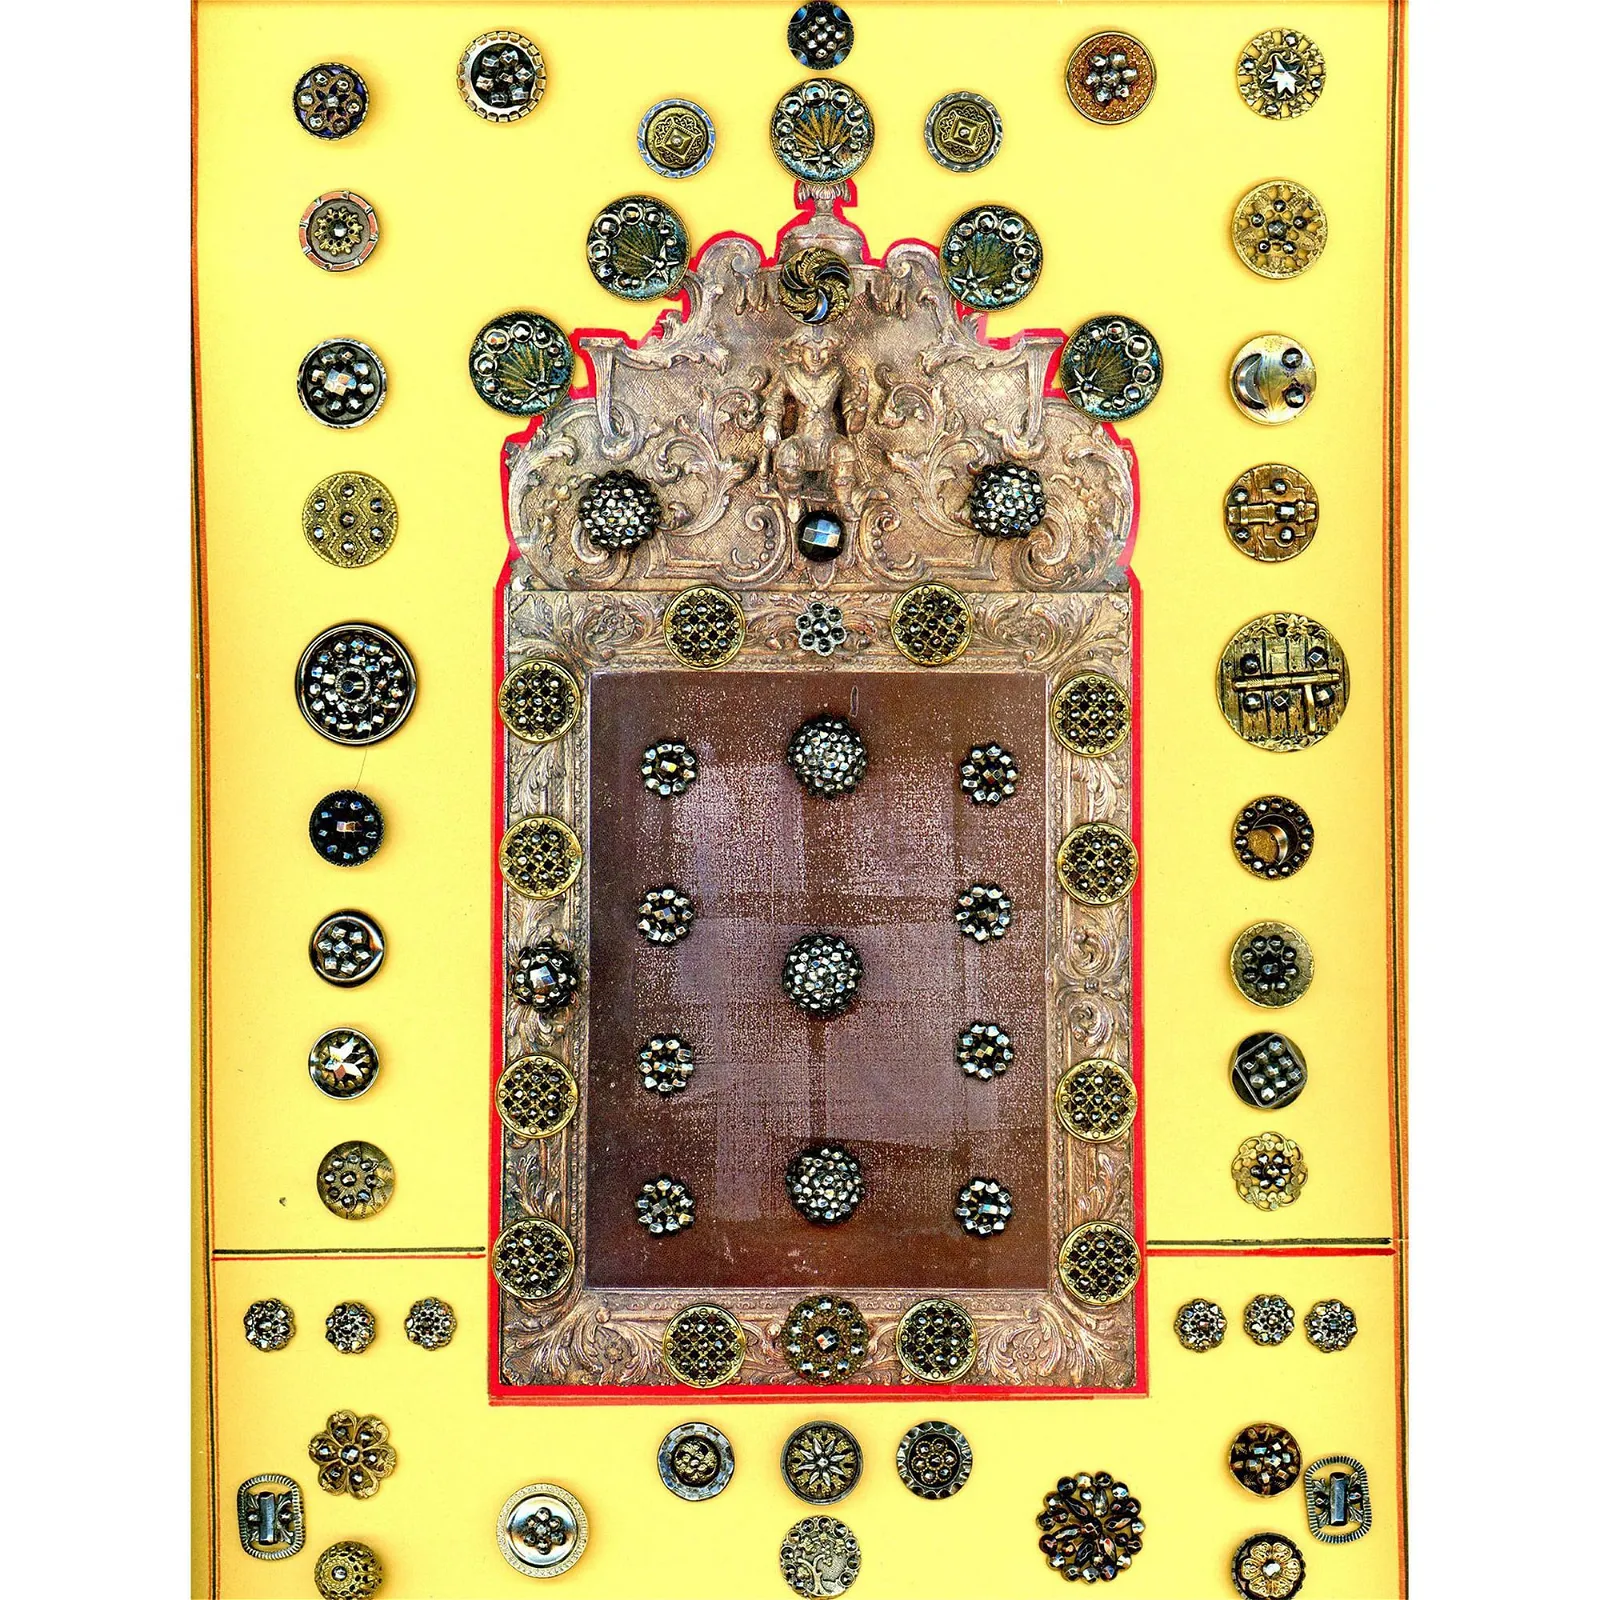 A chocked full card of brass and steel buttons